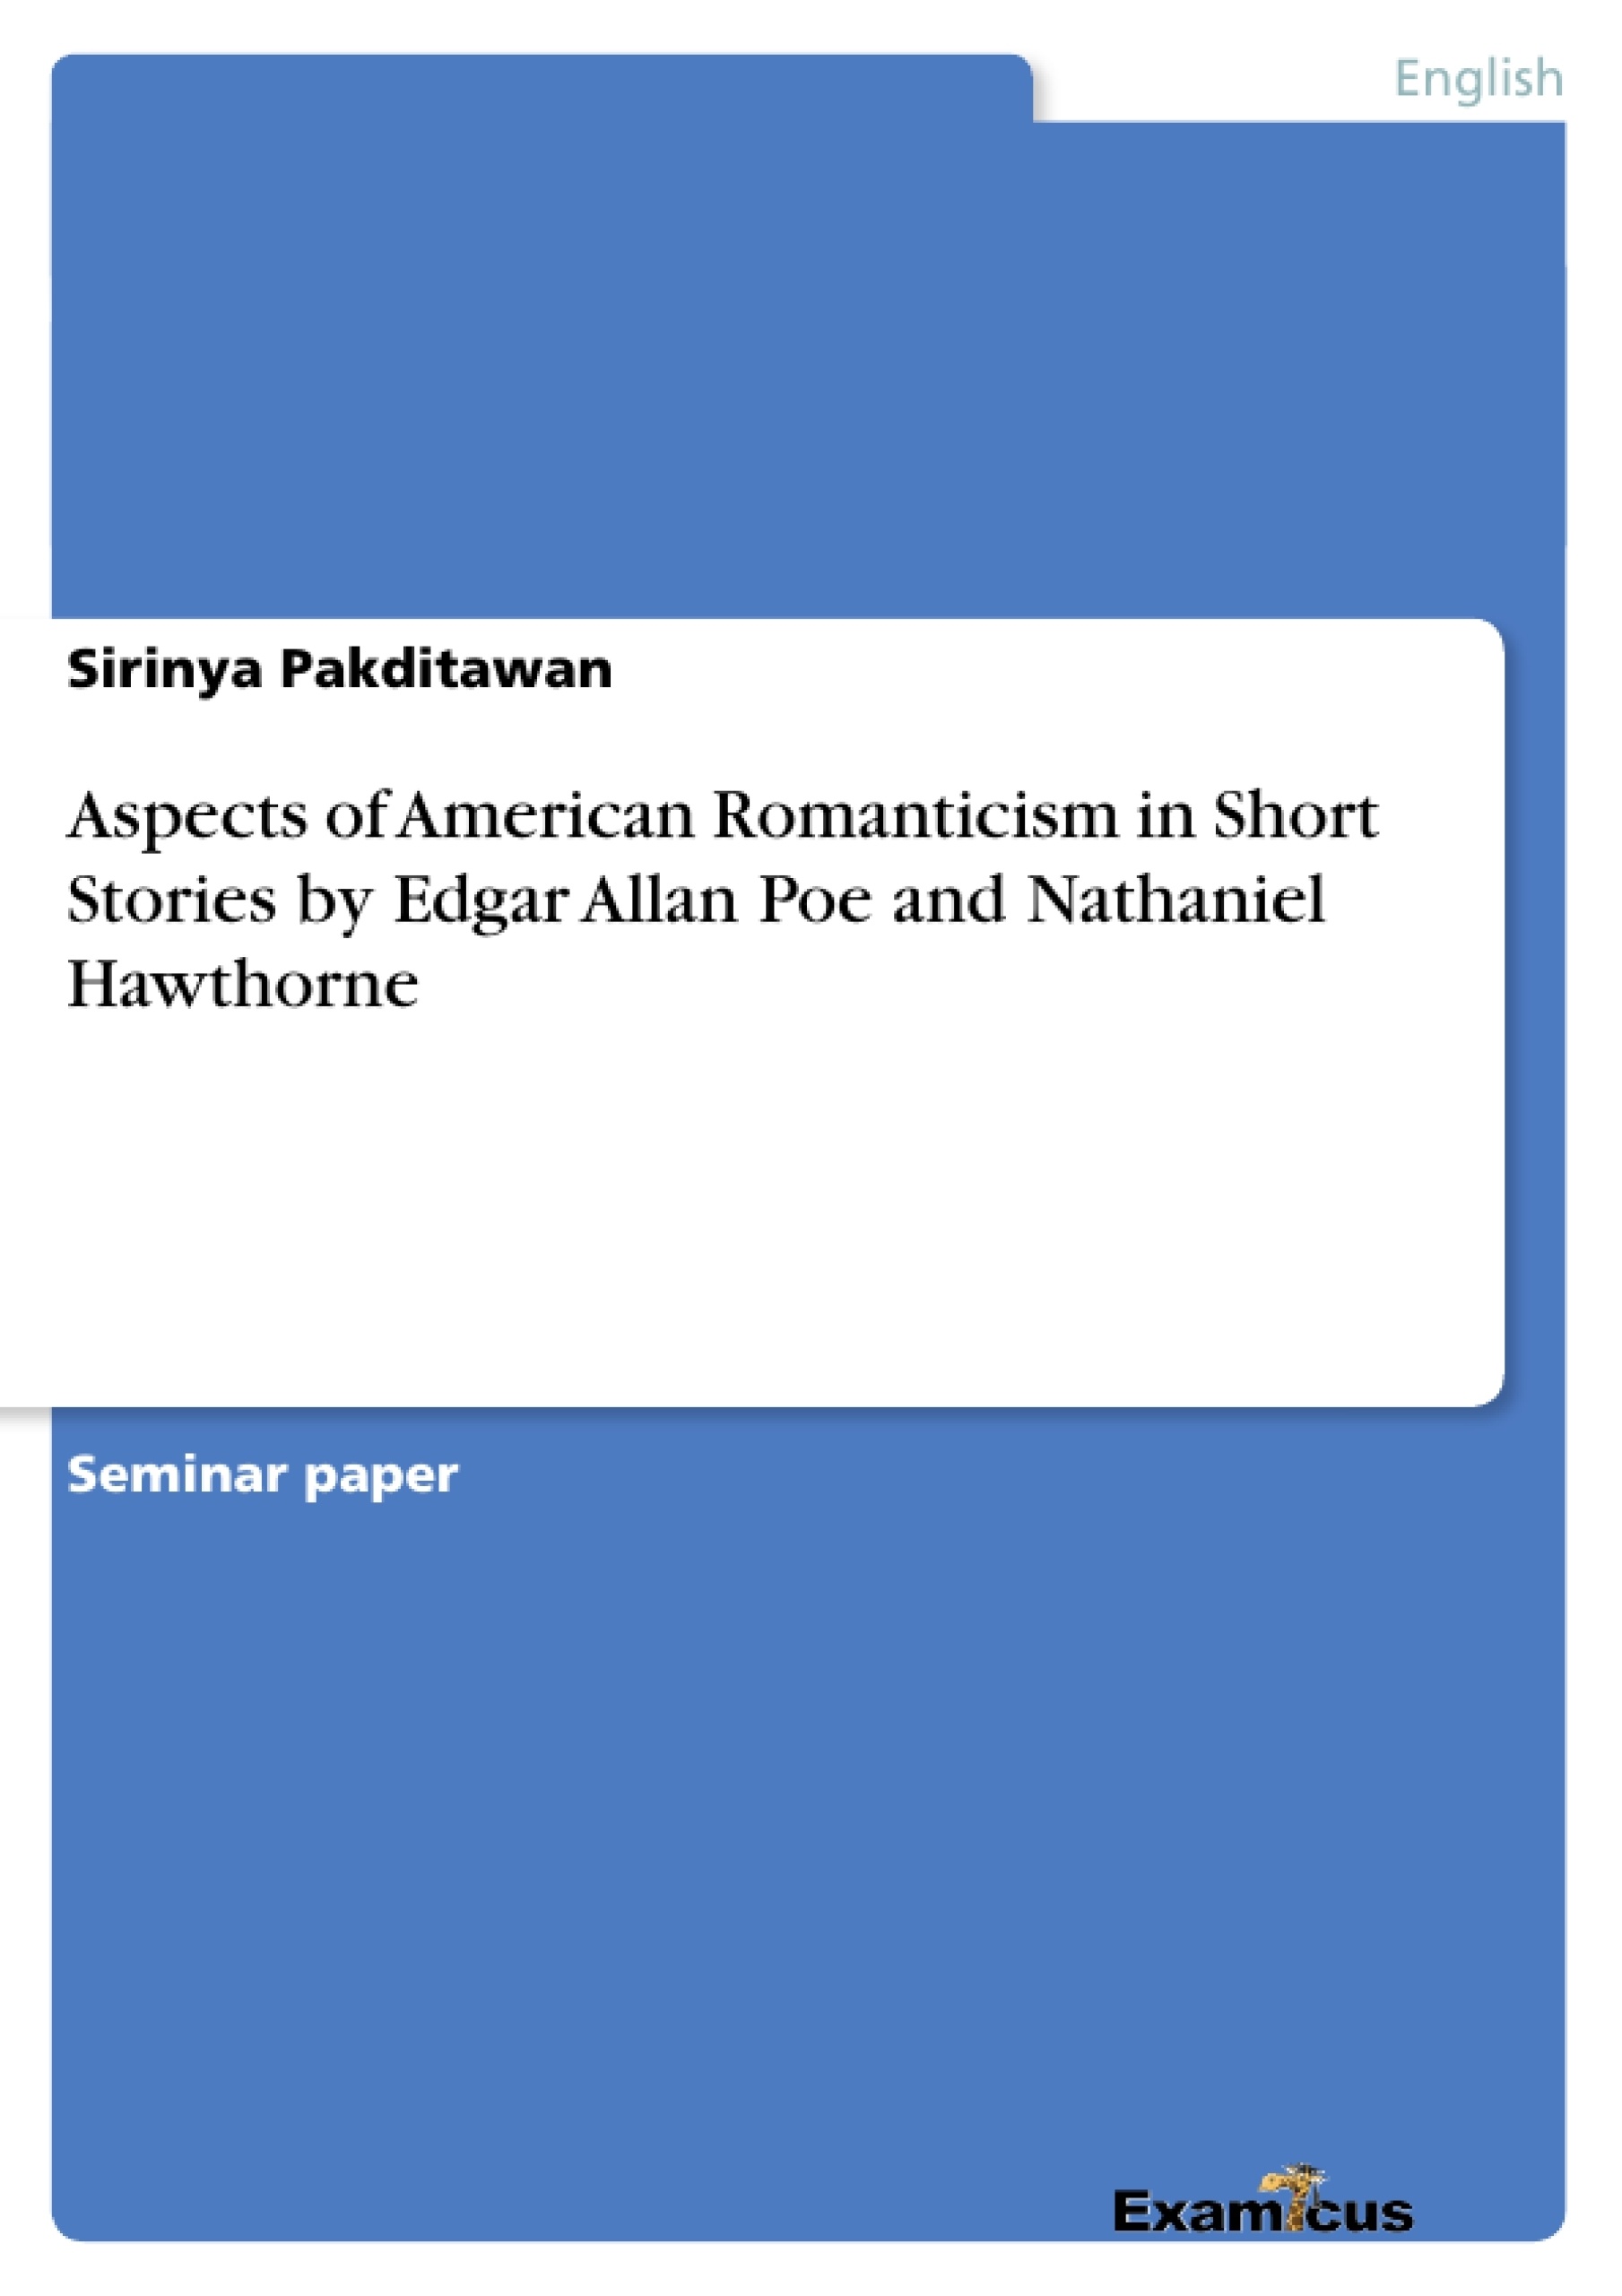 Title: Aspects of American Romanticism in Short Stories by Edgar Allan Poe and Nathaniel Hawthorne